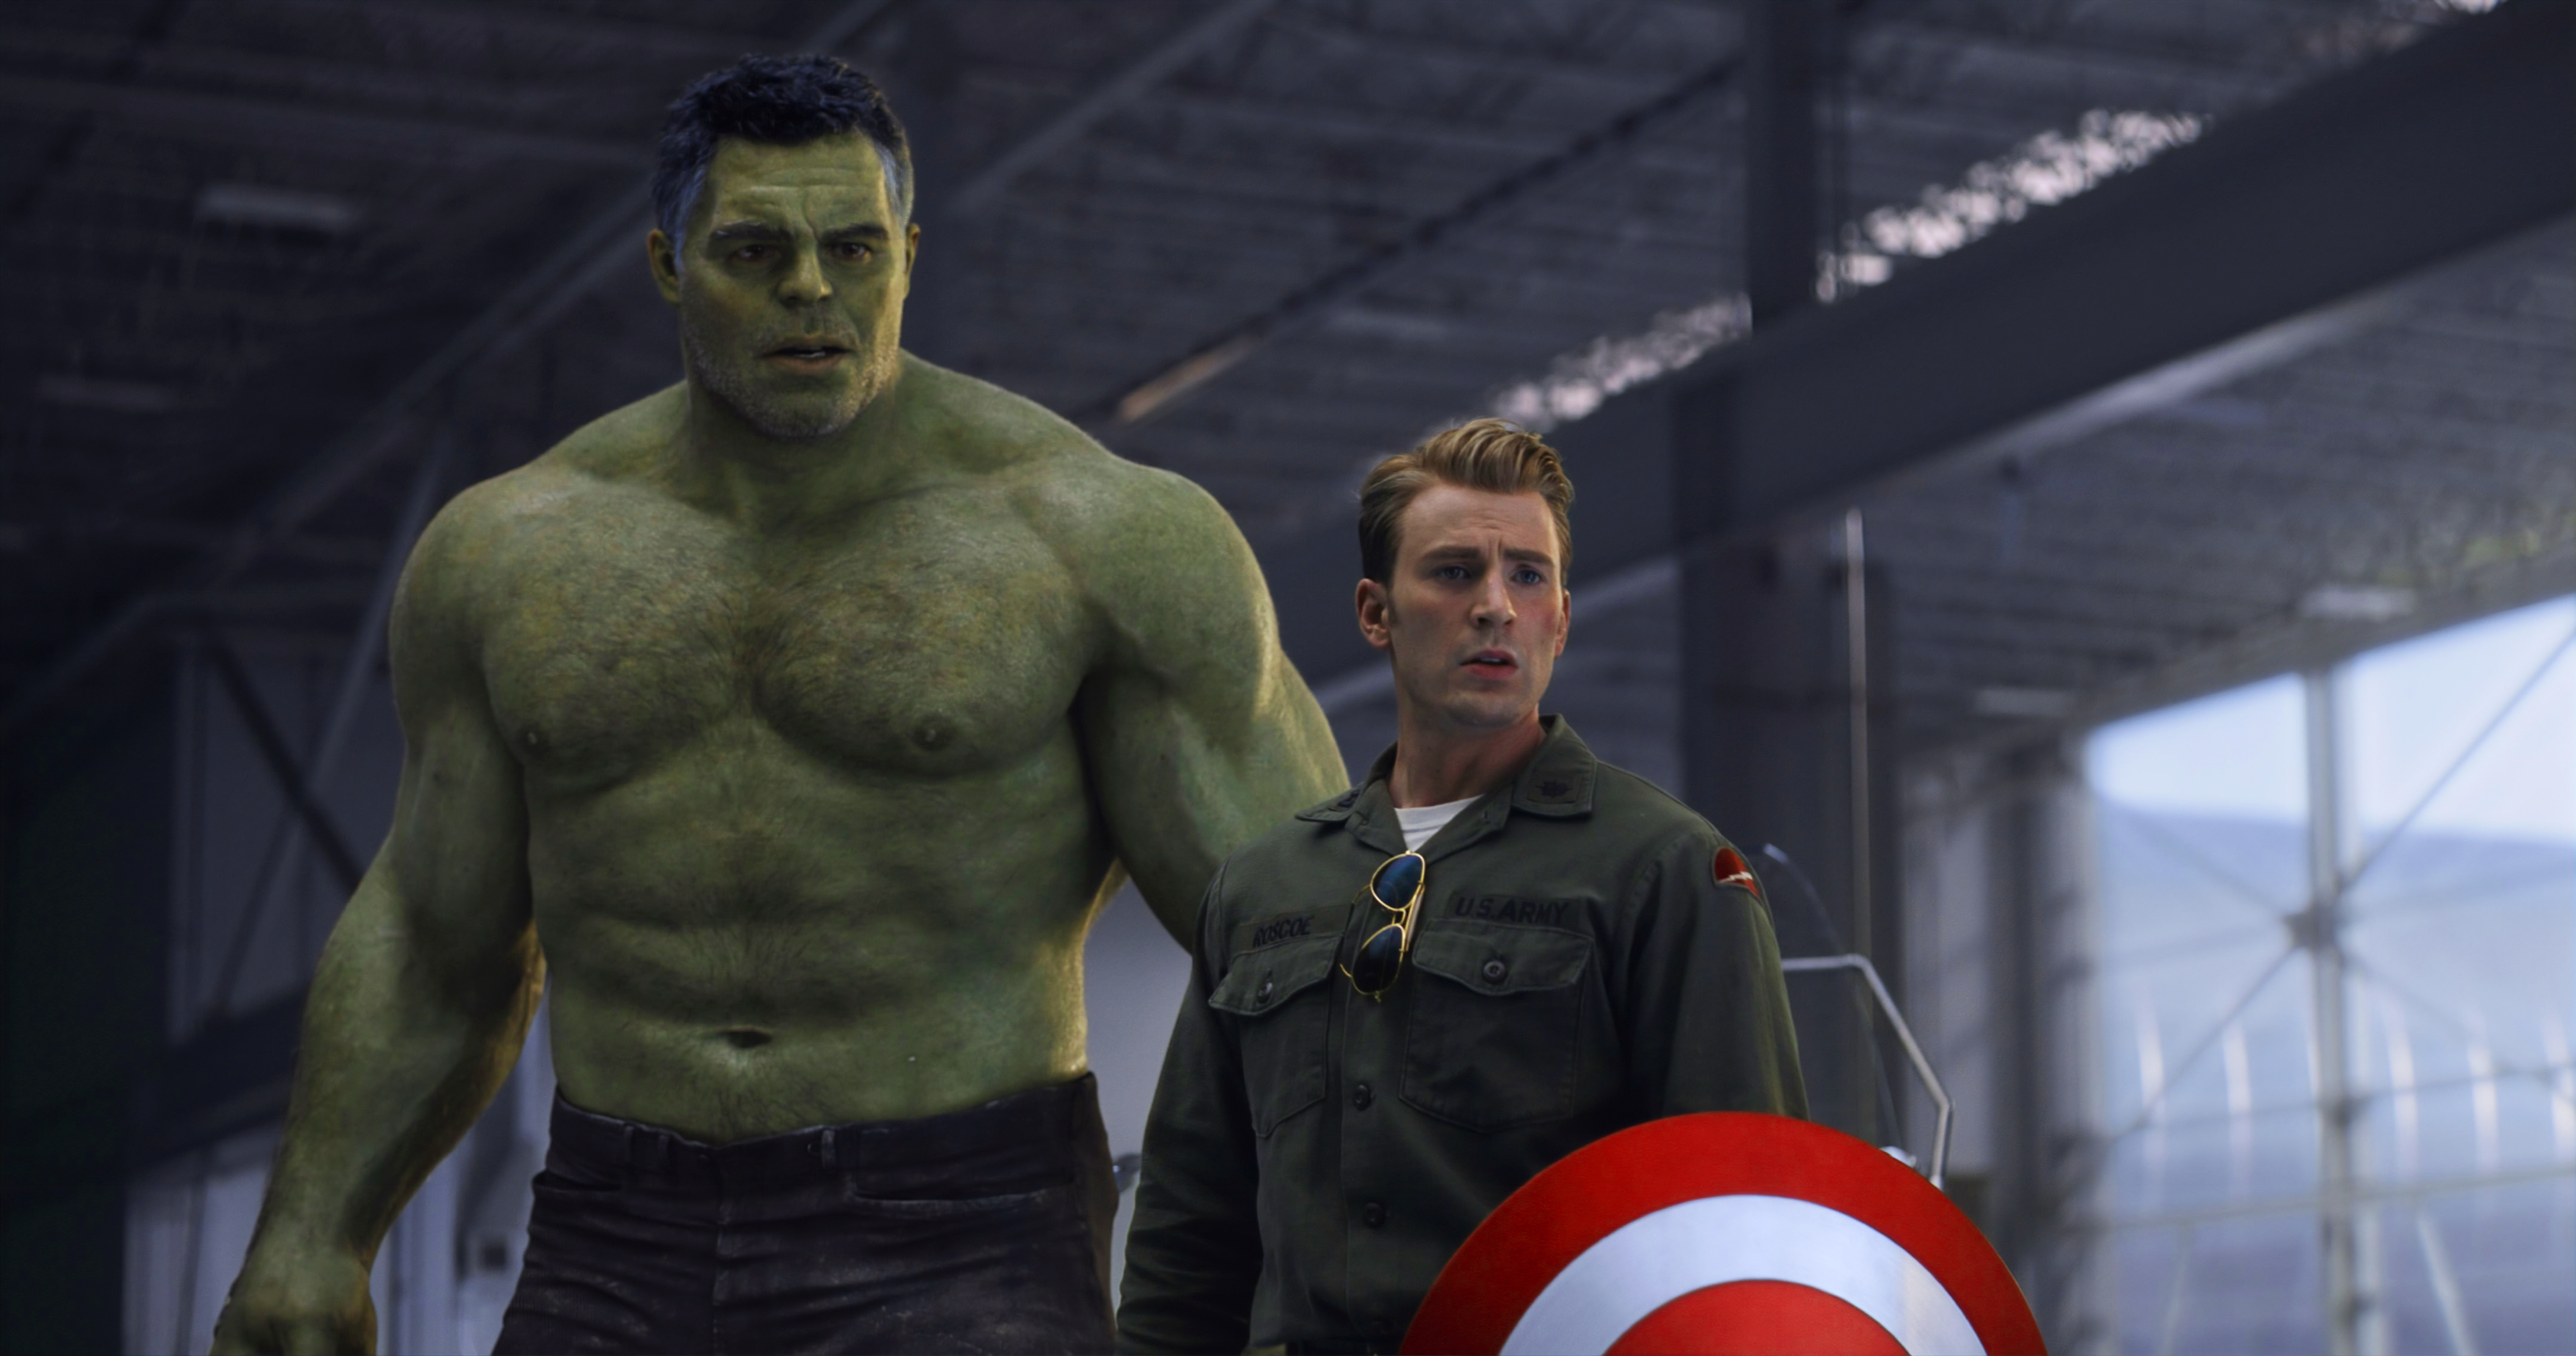 captain-america-and-hulk-time-travel-avengers-end-game-hd-movies-4k